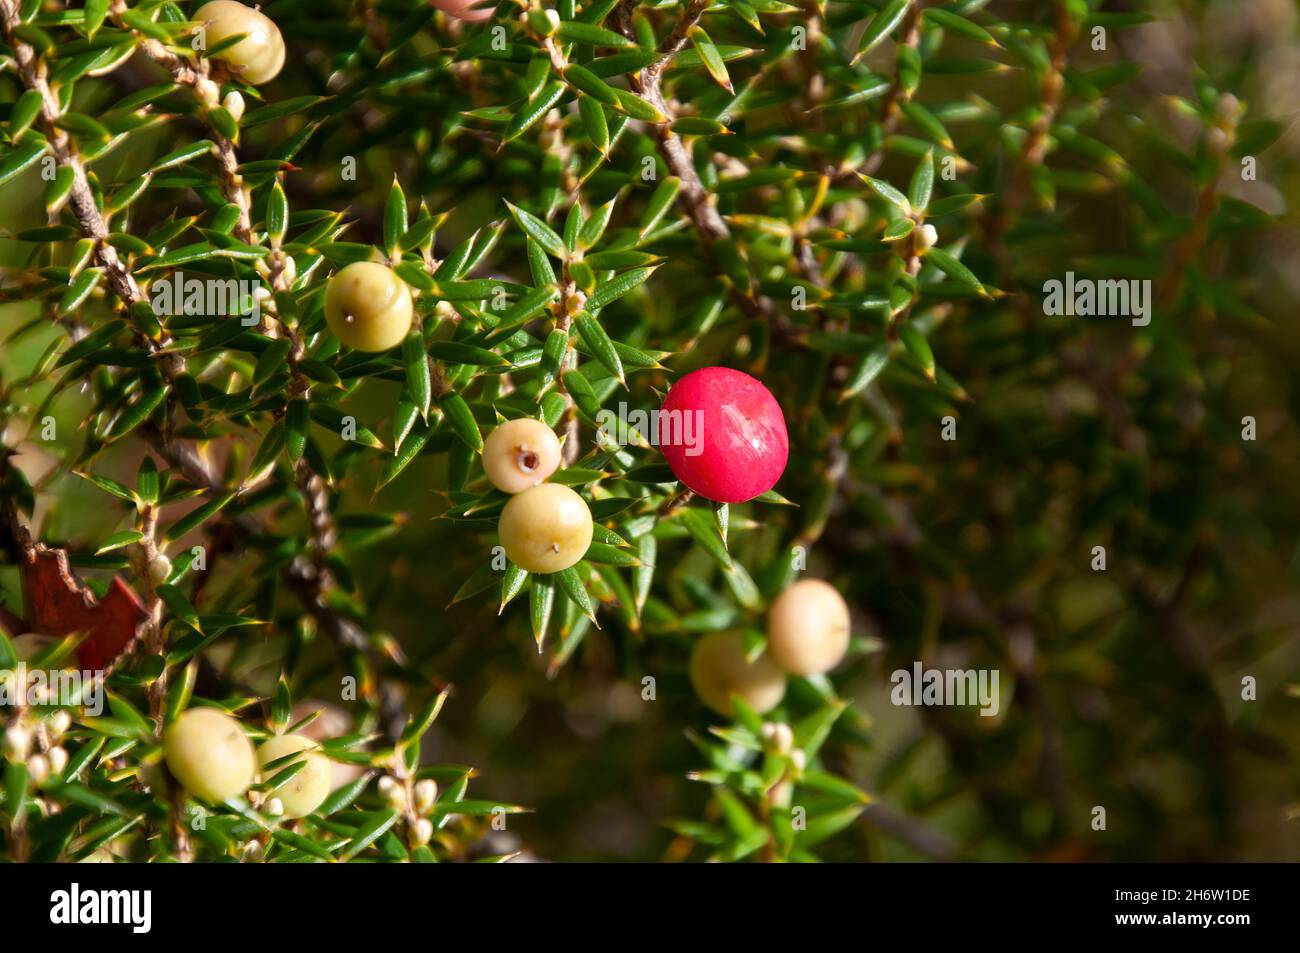 Lake St Clair Australia, close-up of a leptecophylla juniperina Var cyathodes parvifolia or pink mountain-berry tree Stock Photo